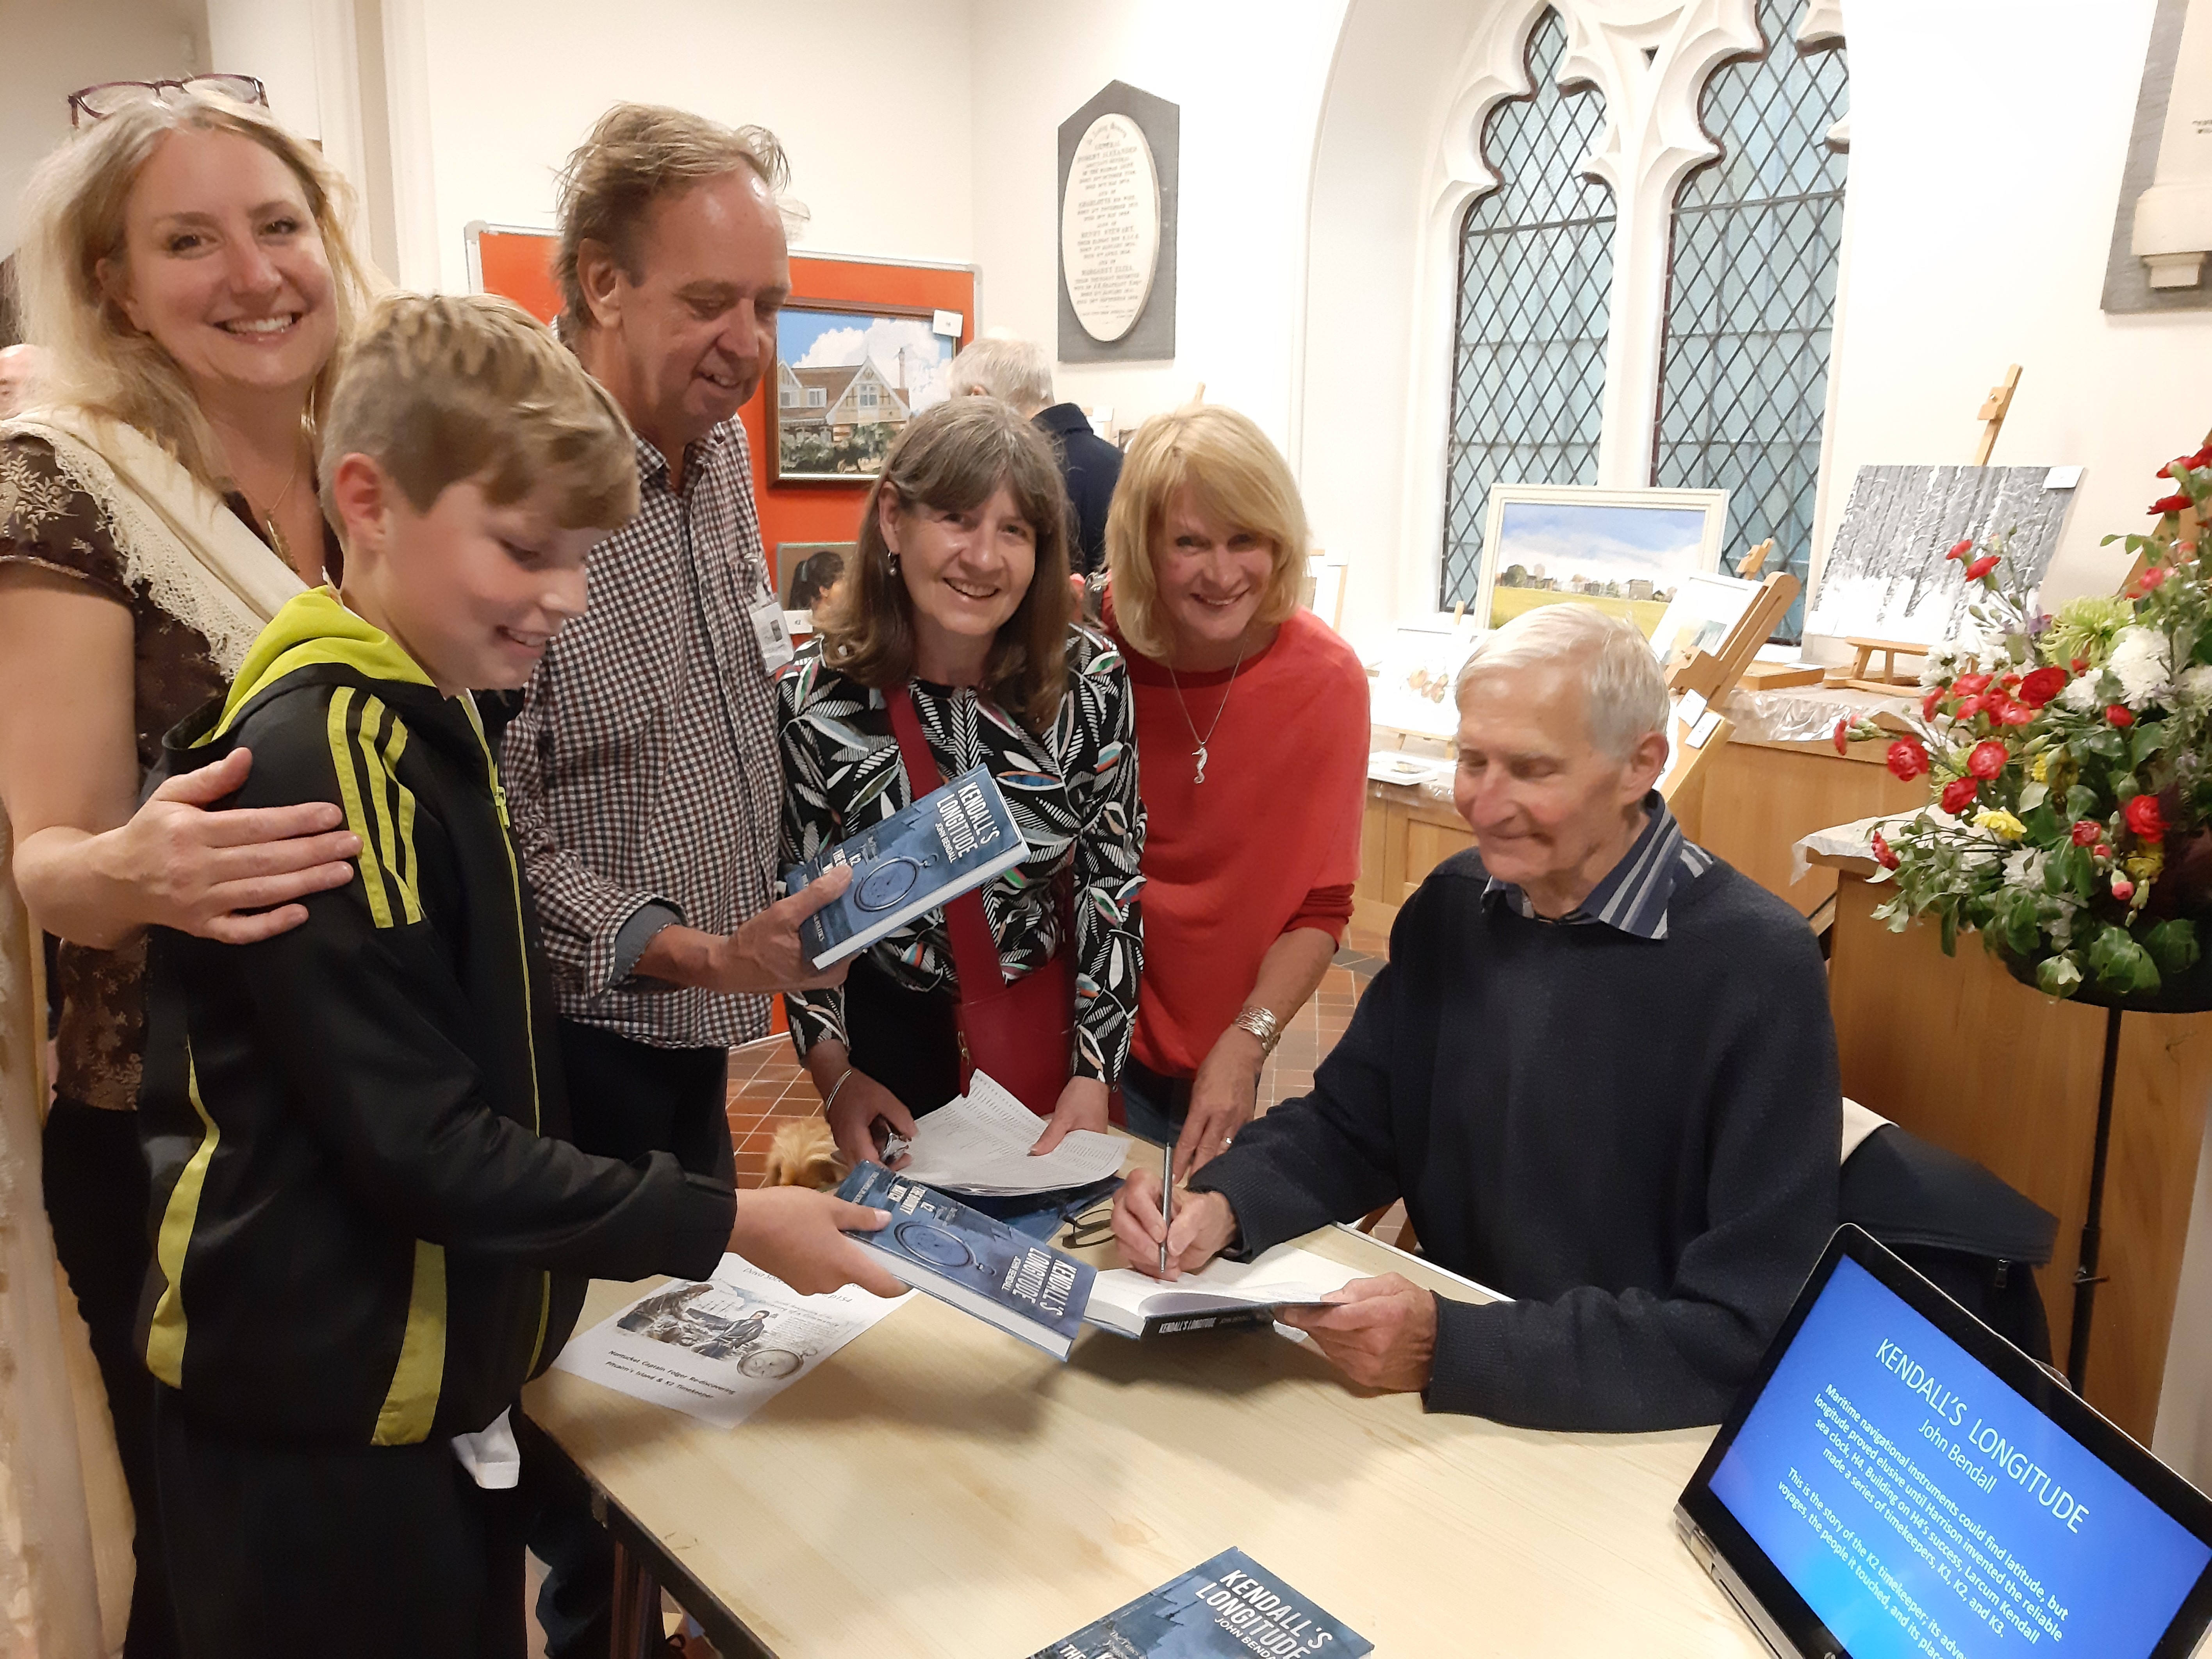 St. Michael's Church Invited the Author John Bendall on a Local Artists Exhibition